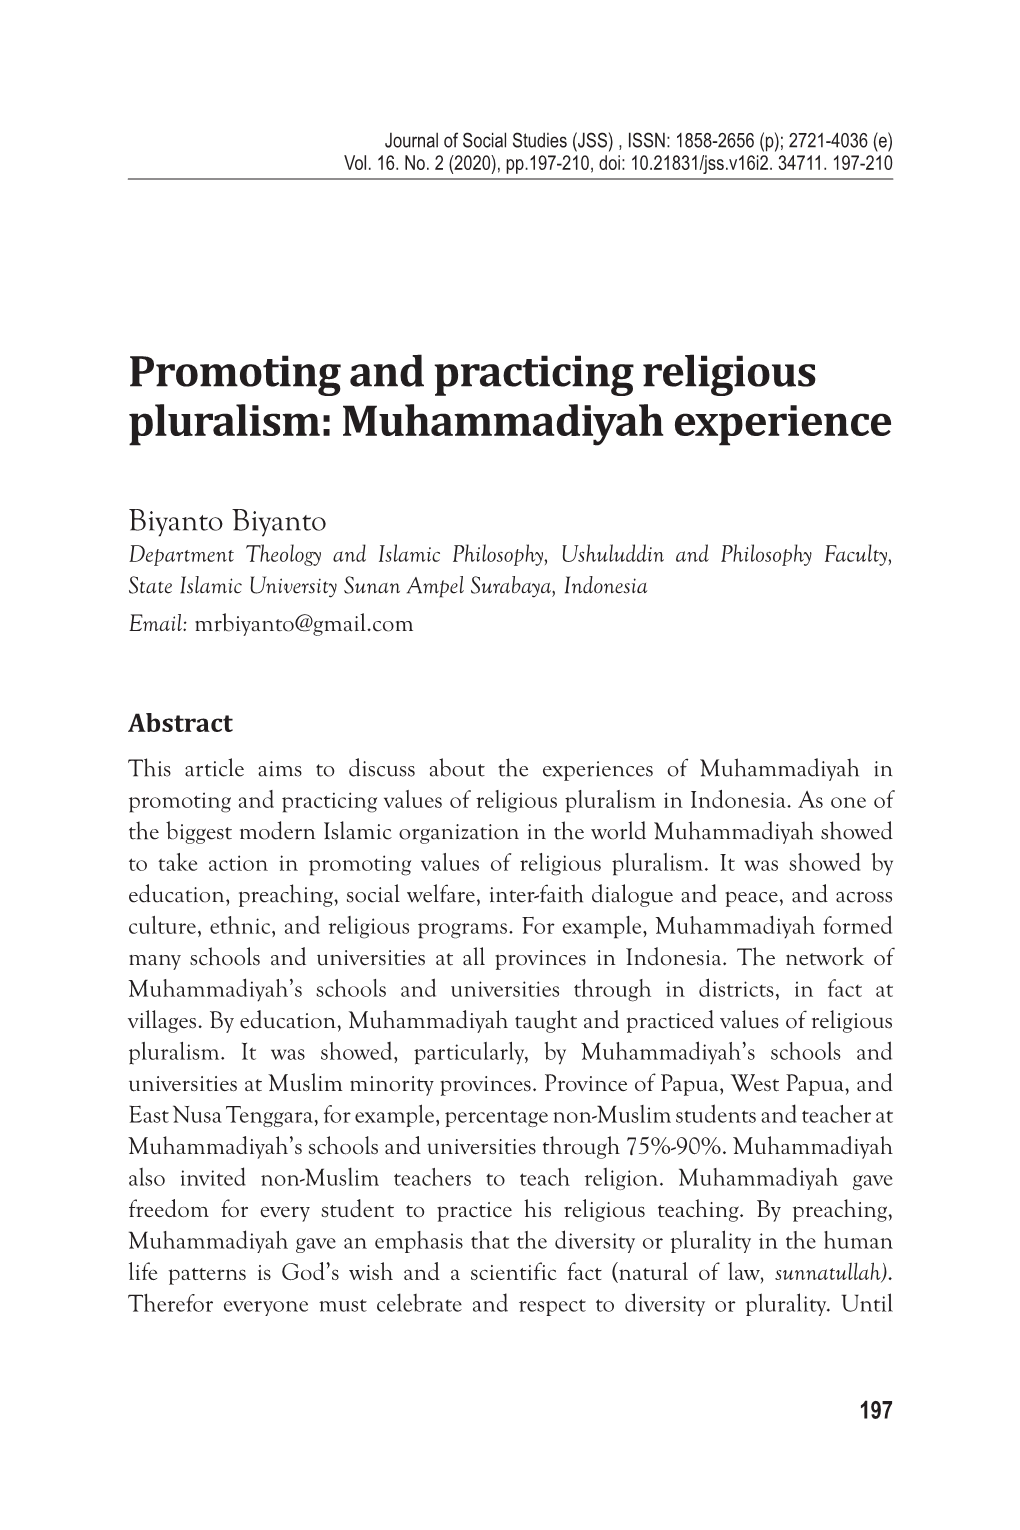 Promoting and Practicing Religious Pluralism: Muhammadiyah Experience